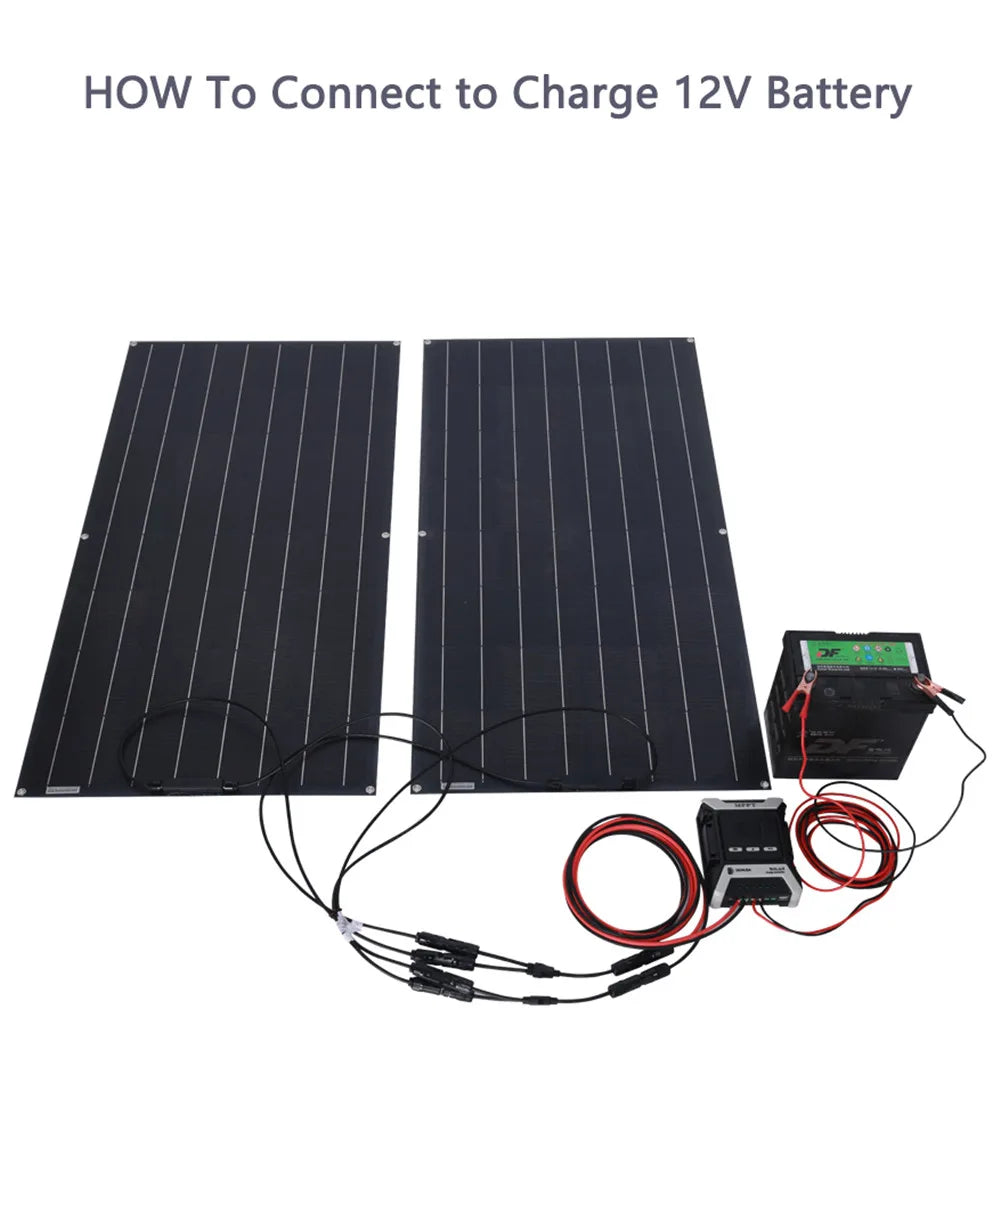 JINGYANG long lasting Semi Flexible solar panel, Connect to charge your 12V battery using this solar panel's DC output.